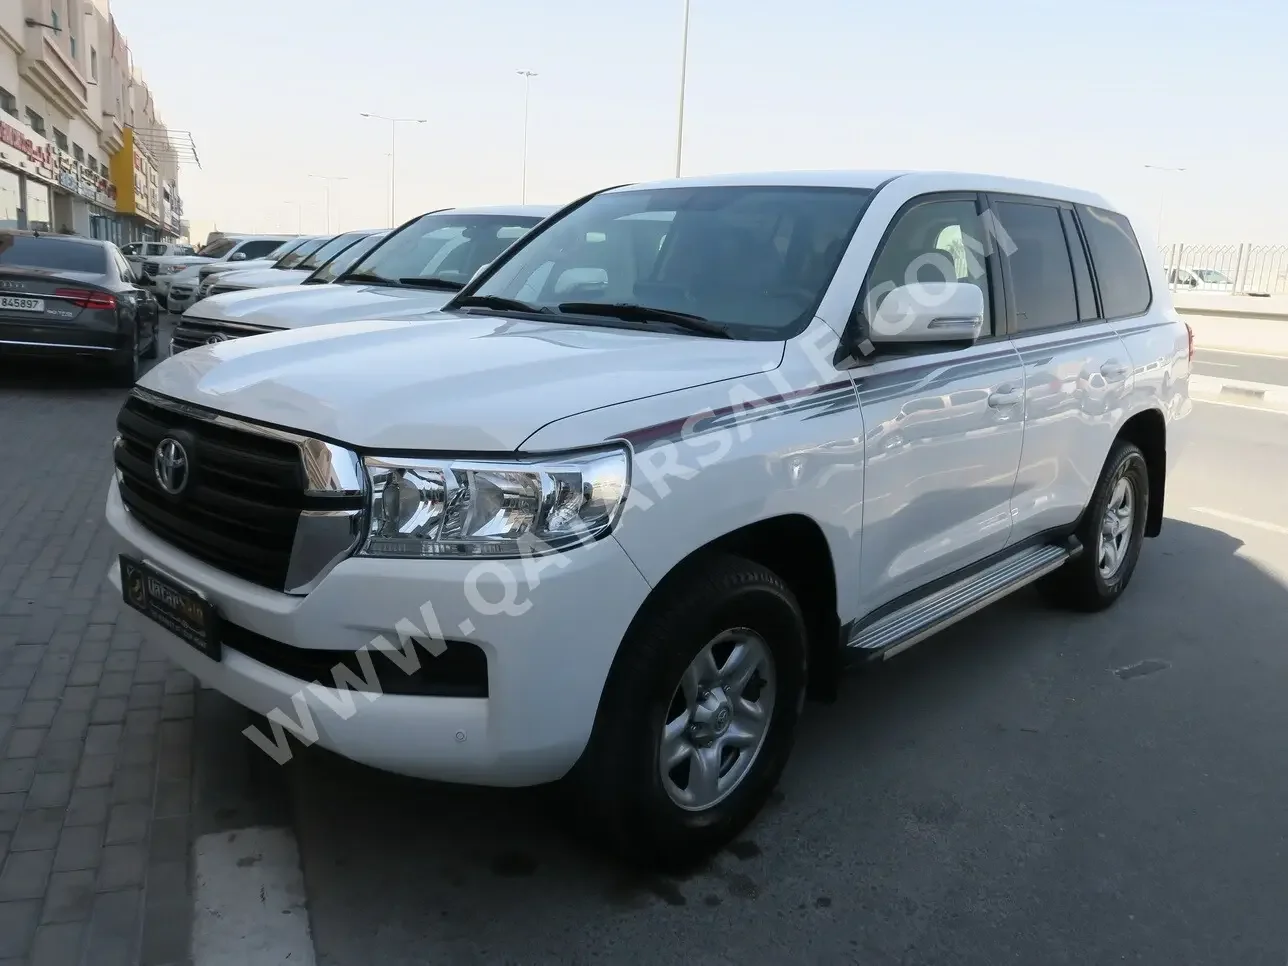  Toyota  Land Cruiser  GX  2017  Automatic  137,000 Km  6 Cylinder  Four Wheel Drive (4WD)  SUV  White  With Warranty